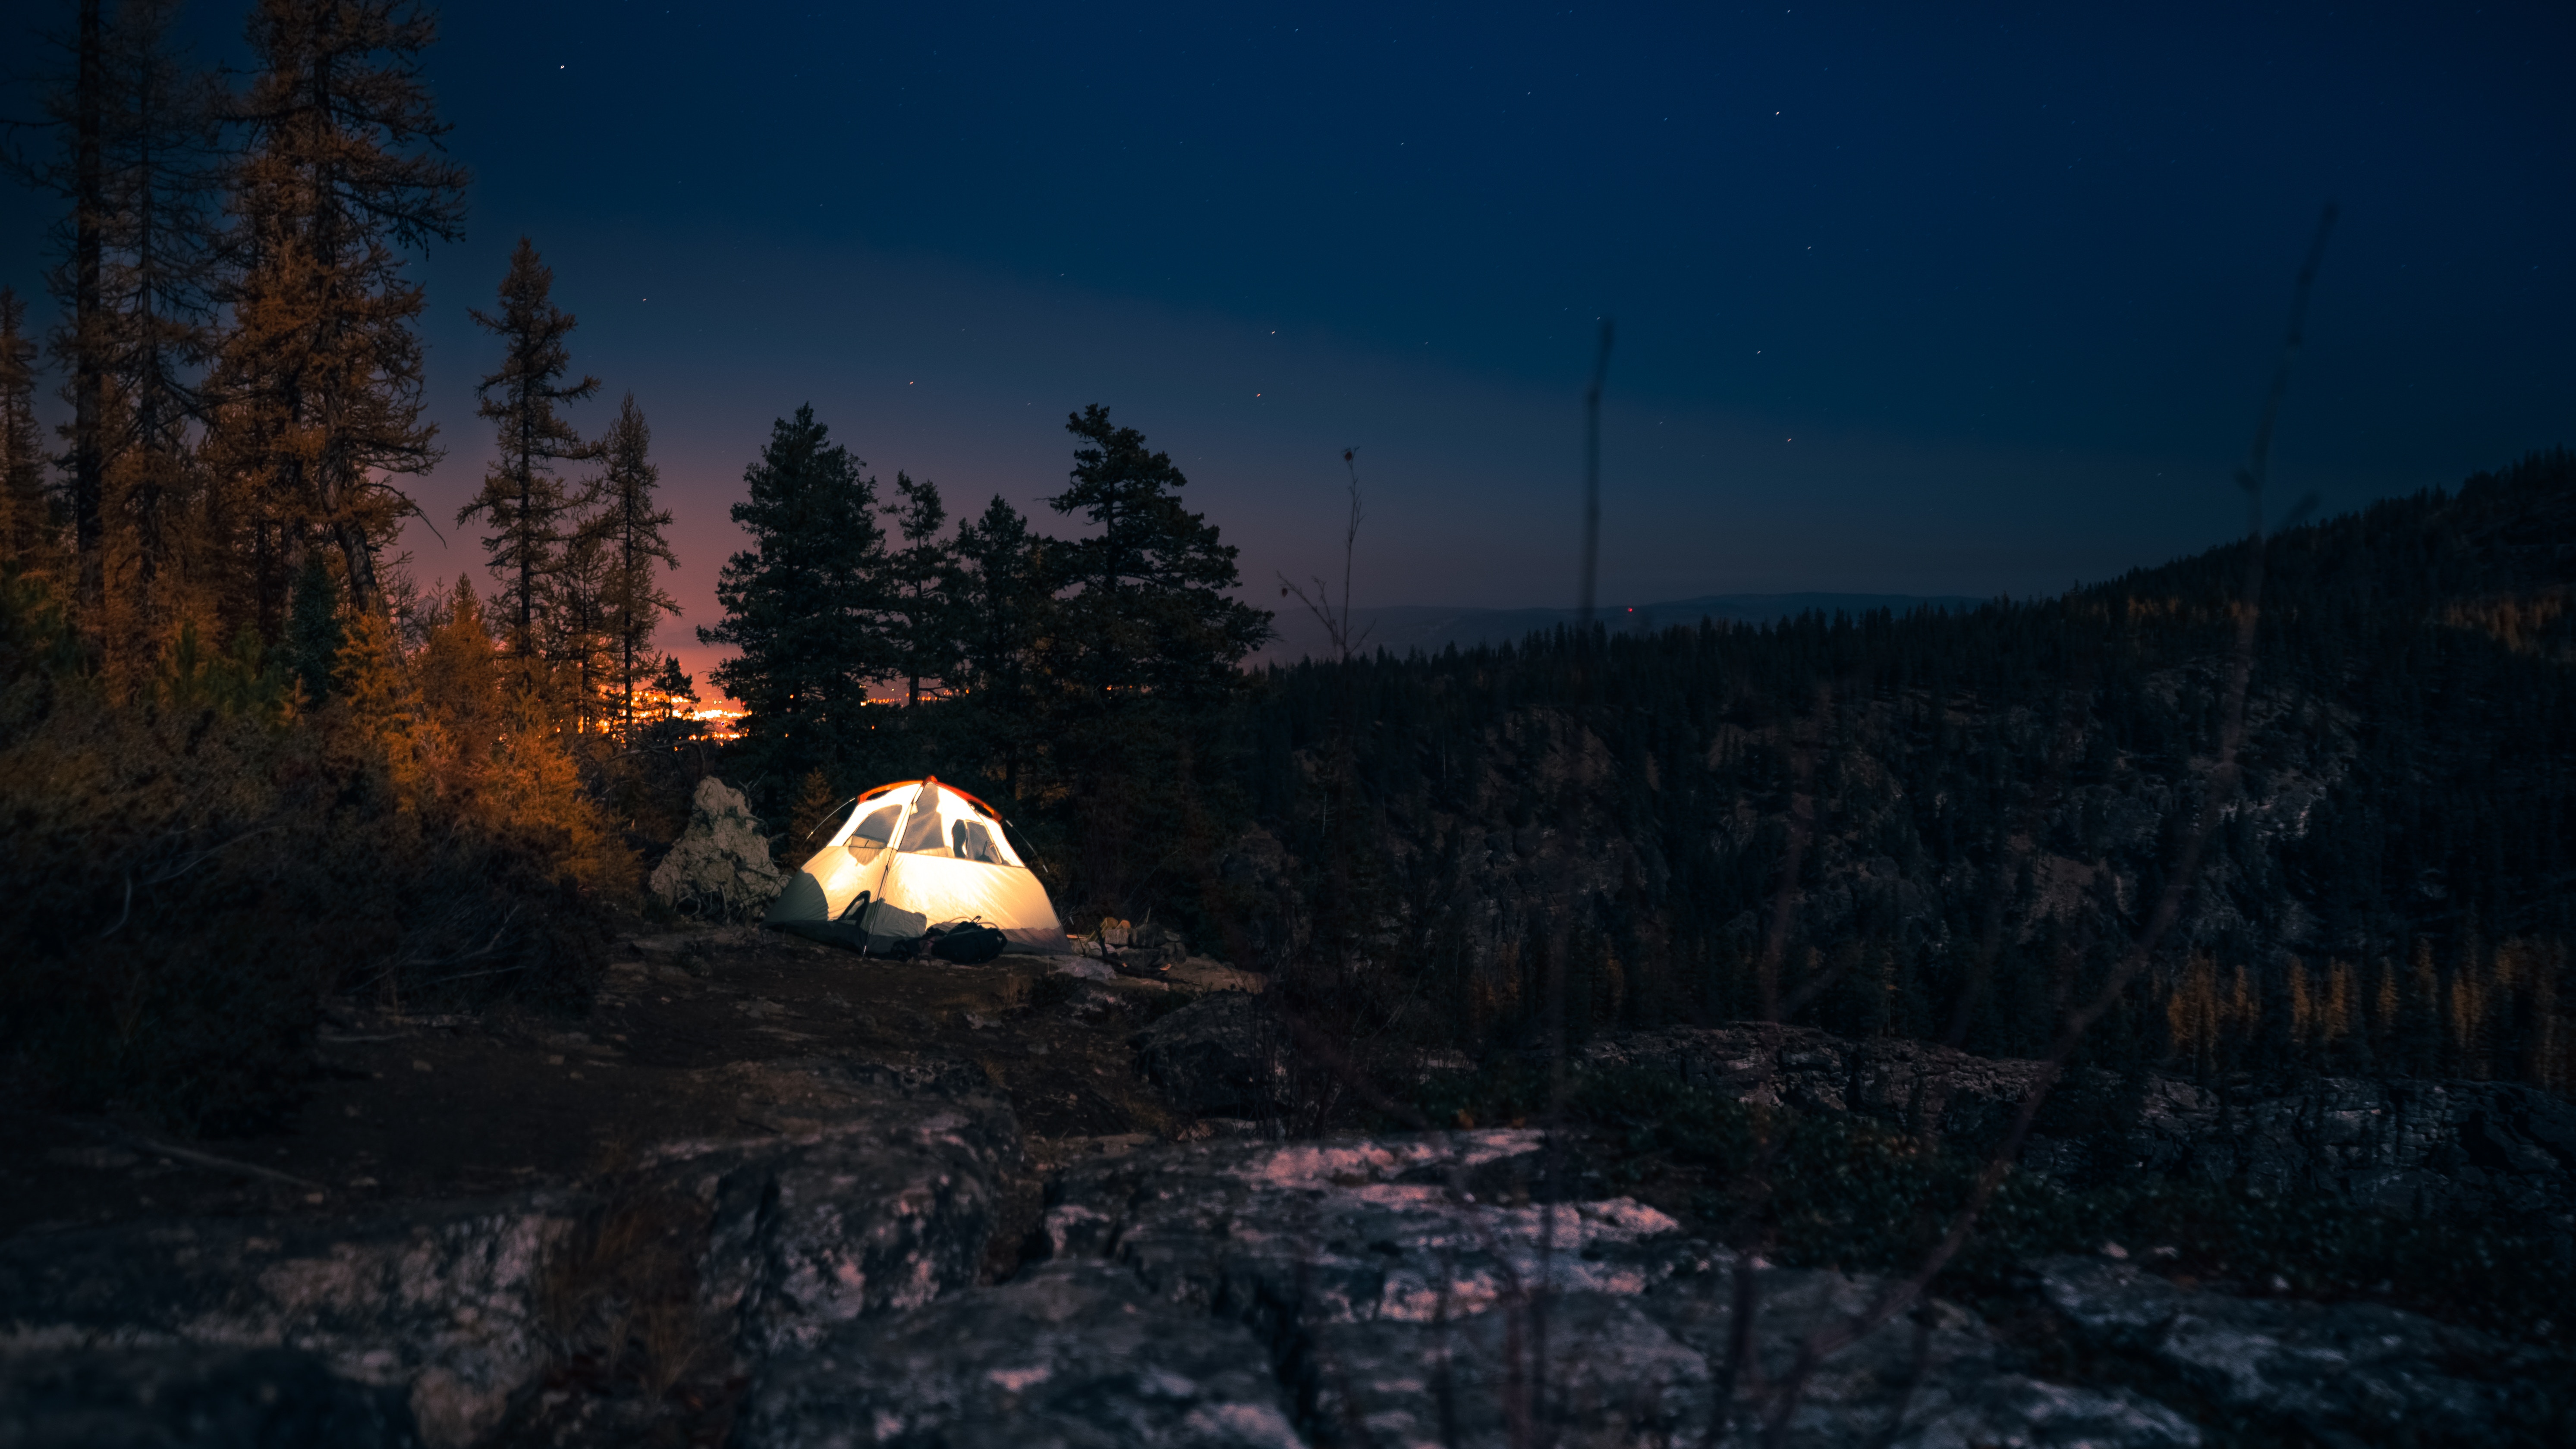 Download background dark, trees, night, starry sky, tent, camping, campsite